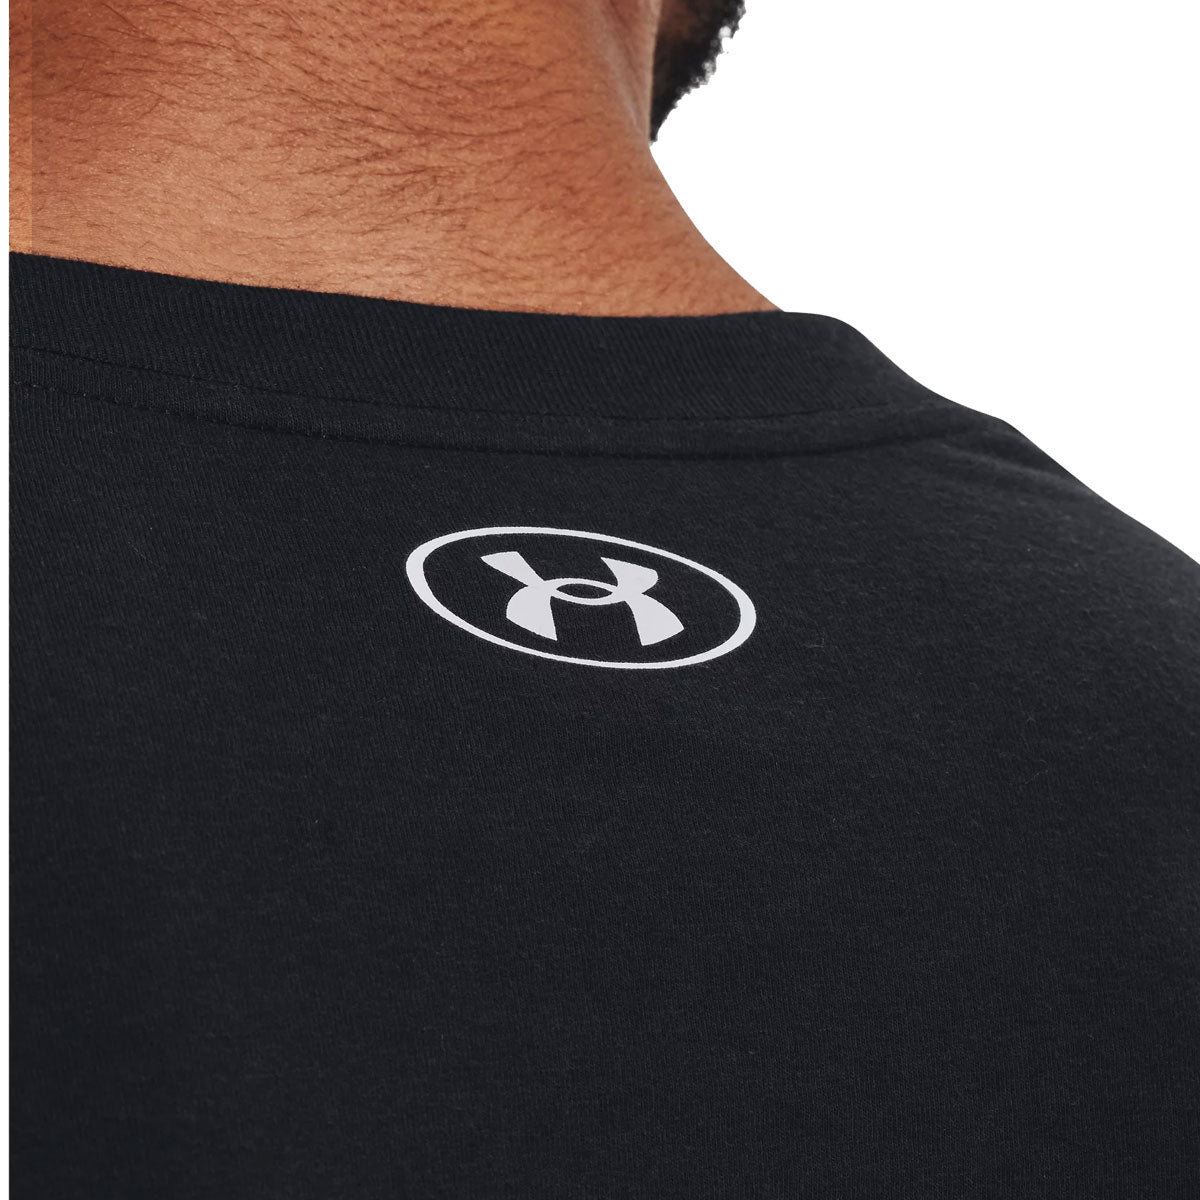 Under Armour Camo Boxed Sportstyle Long Sleeve Tee - Mens - Black/White